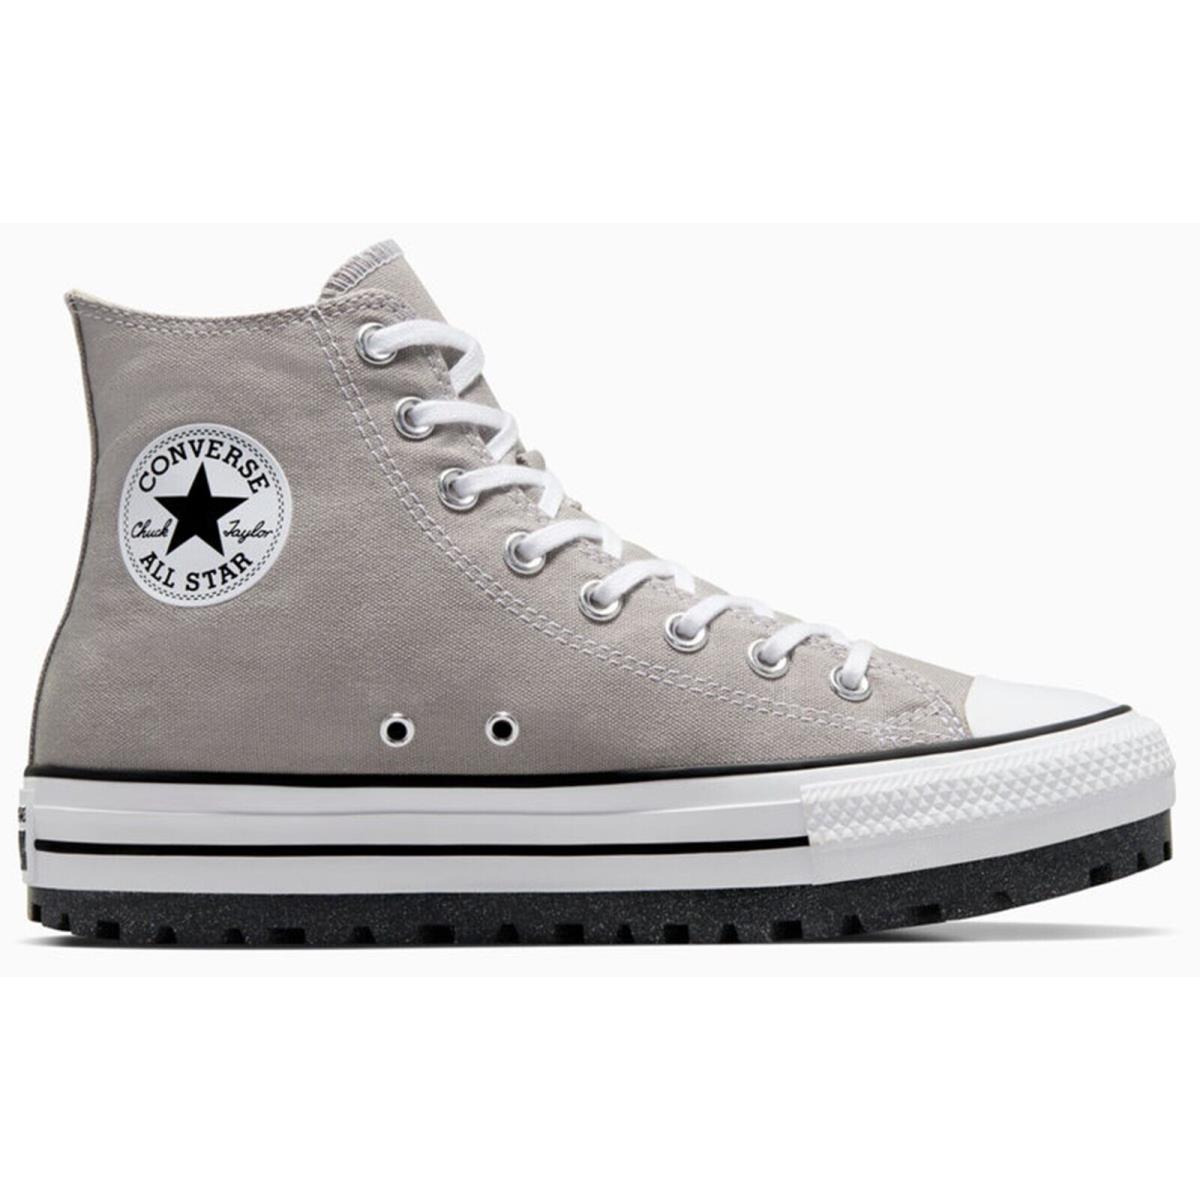 Converse Chuck Taylor All Star City Trek Traction Rubber Outsole Men`s Shoes Gray